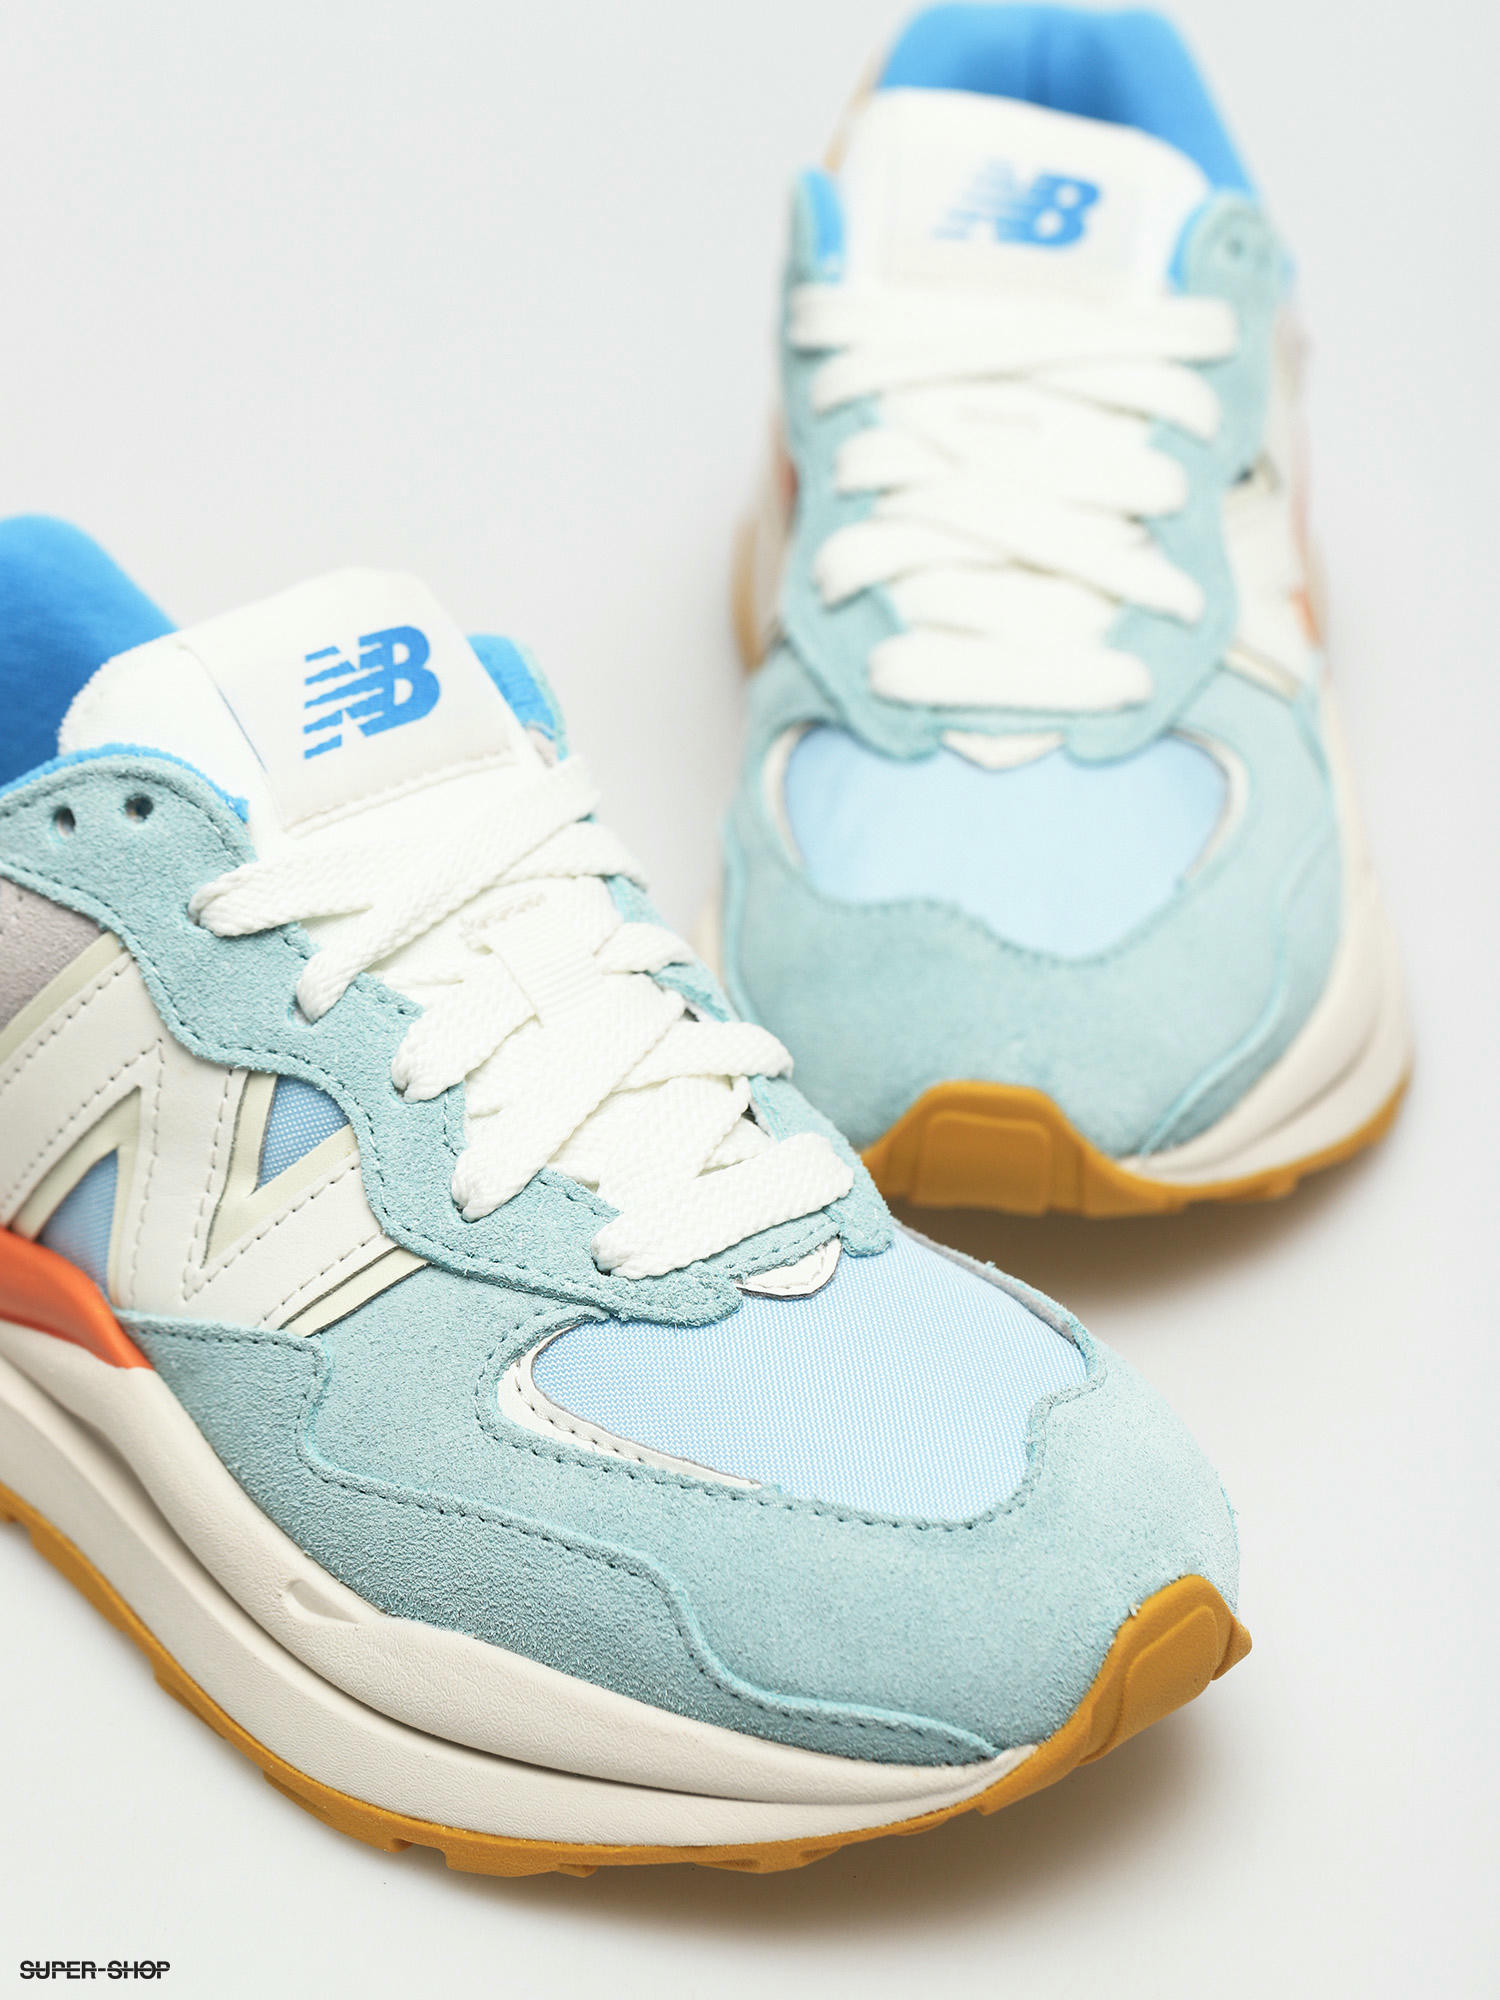 oyster x new balance shoes